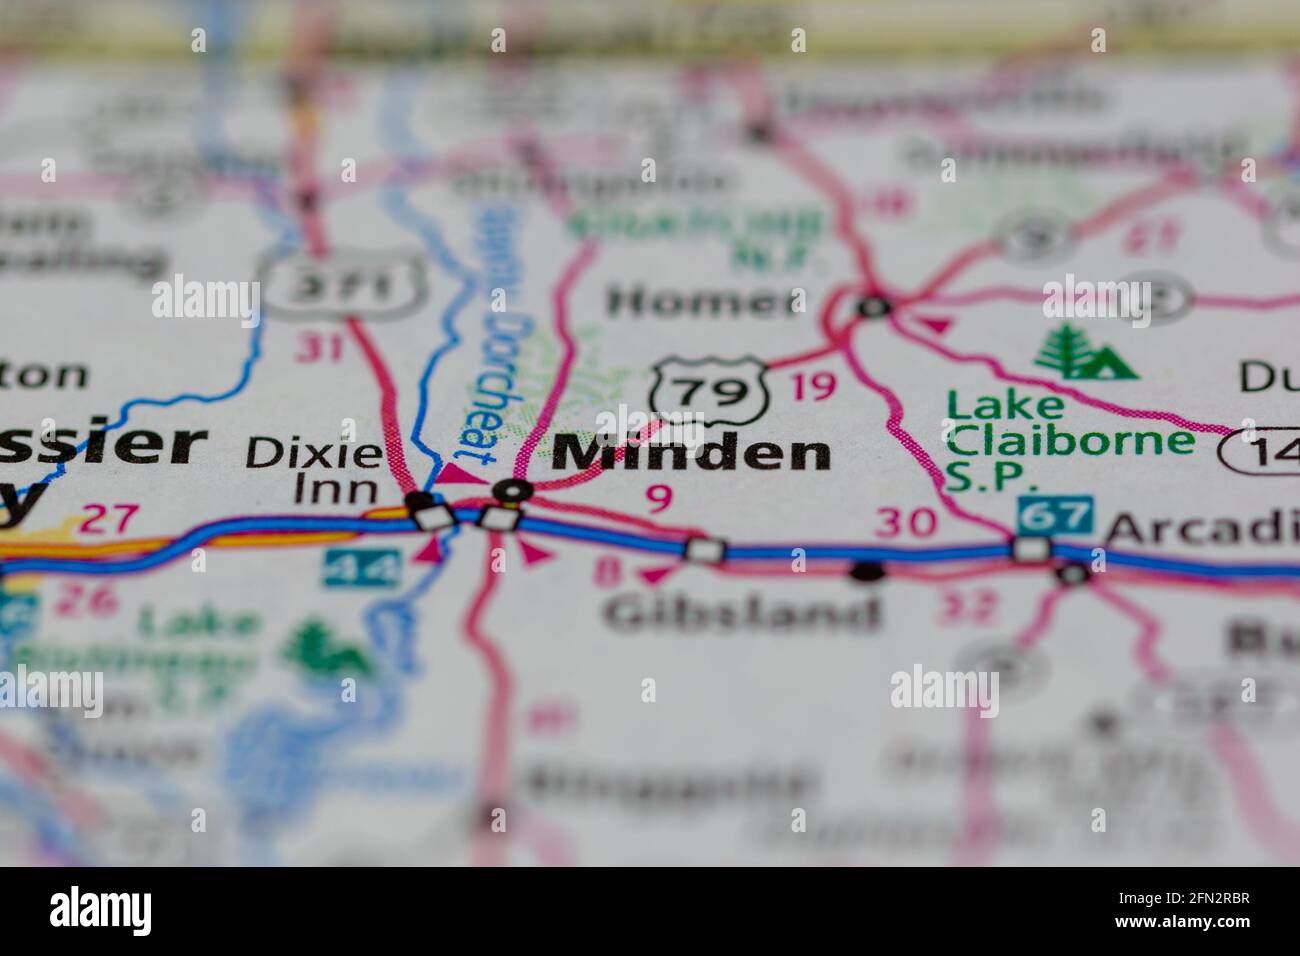 Minden Louisiana USA Shown on a Geography map or road map Stock Photo